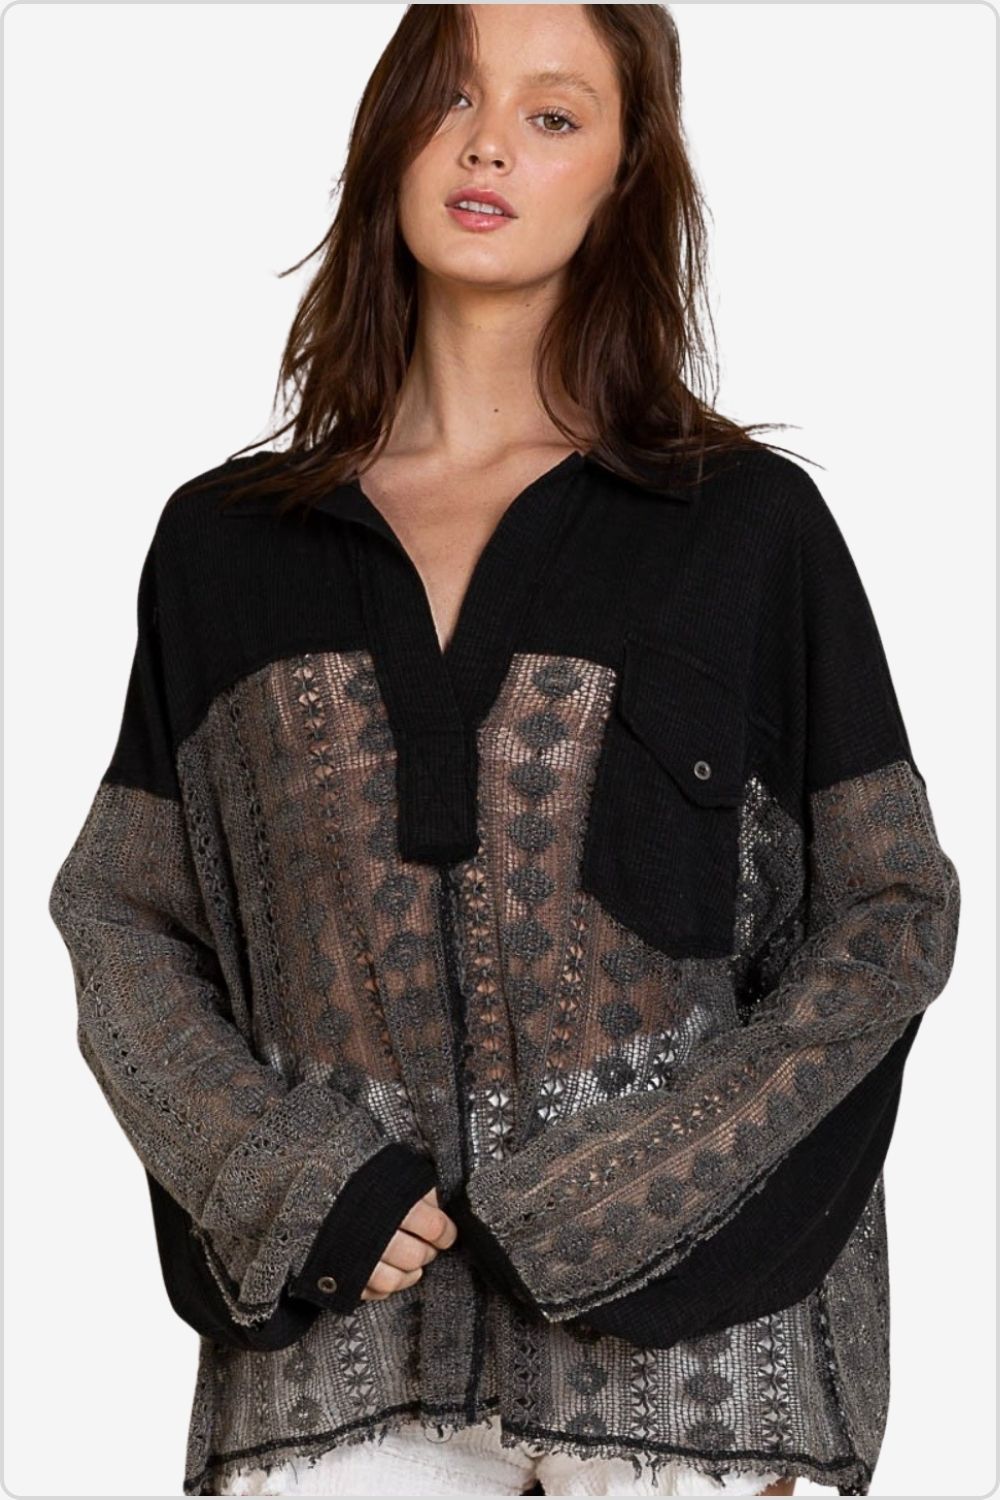 Fashionable black lace blouse with Johnny collar and long sleeves, ideal for elegant layering